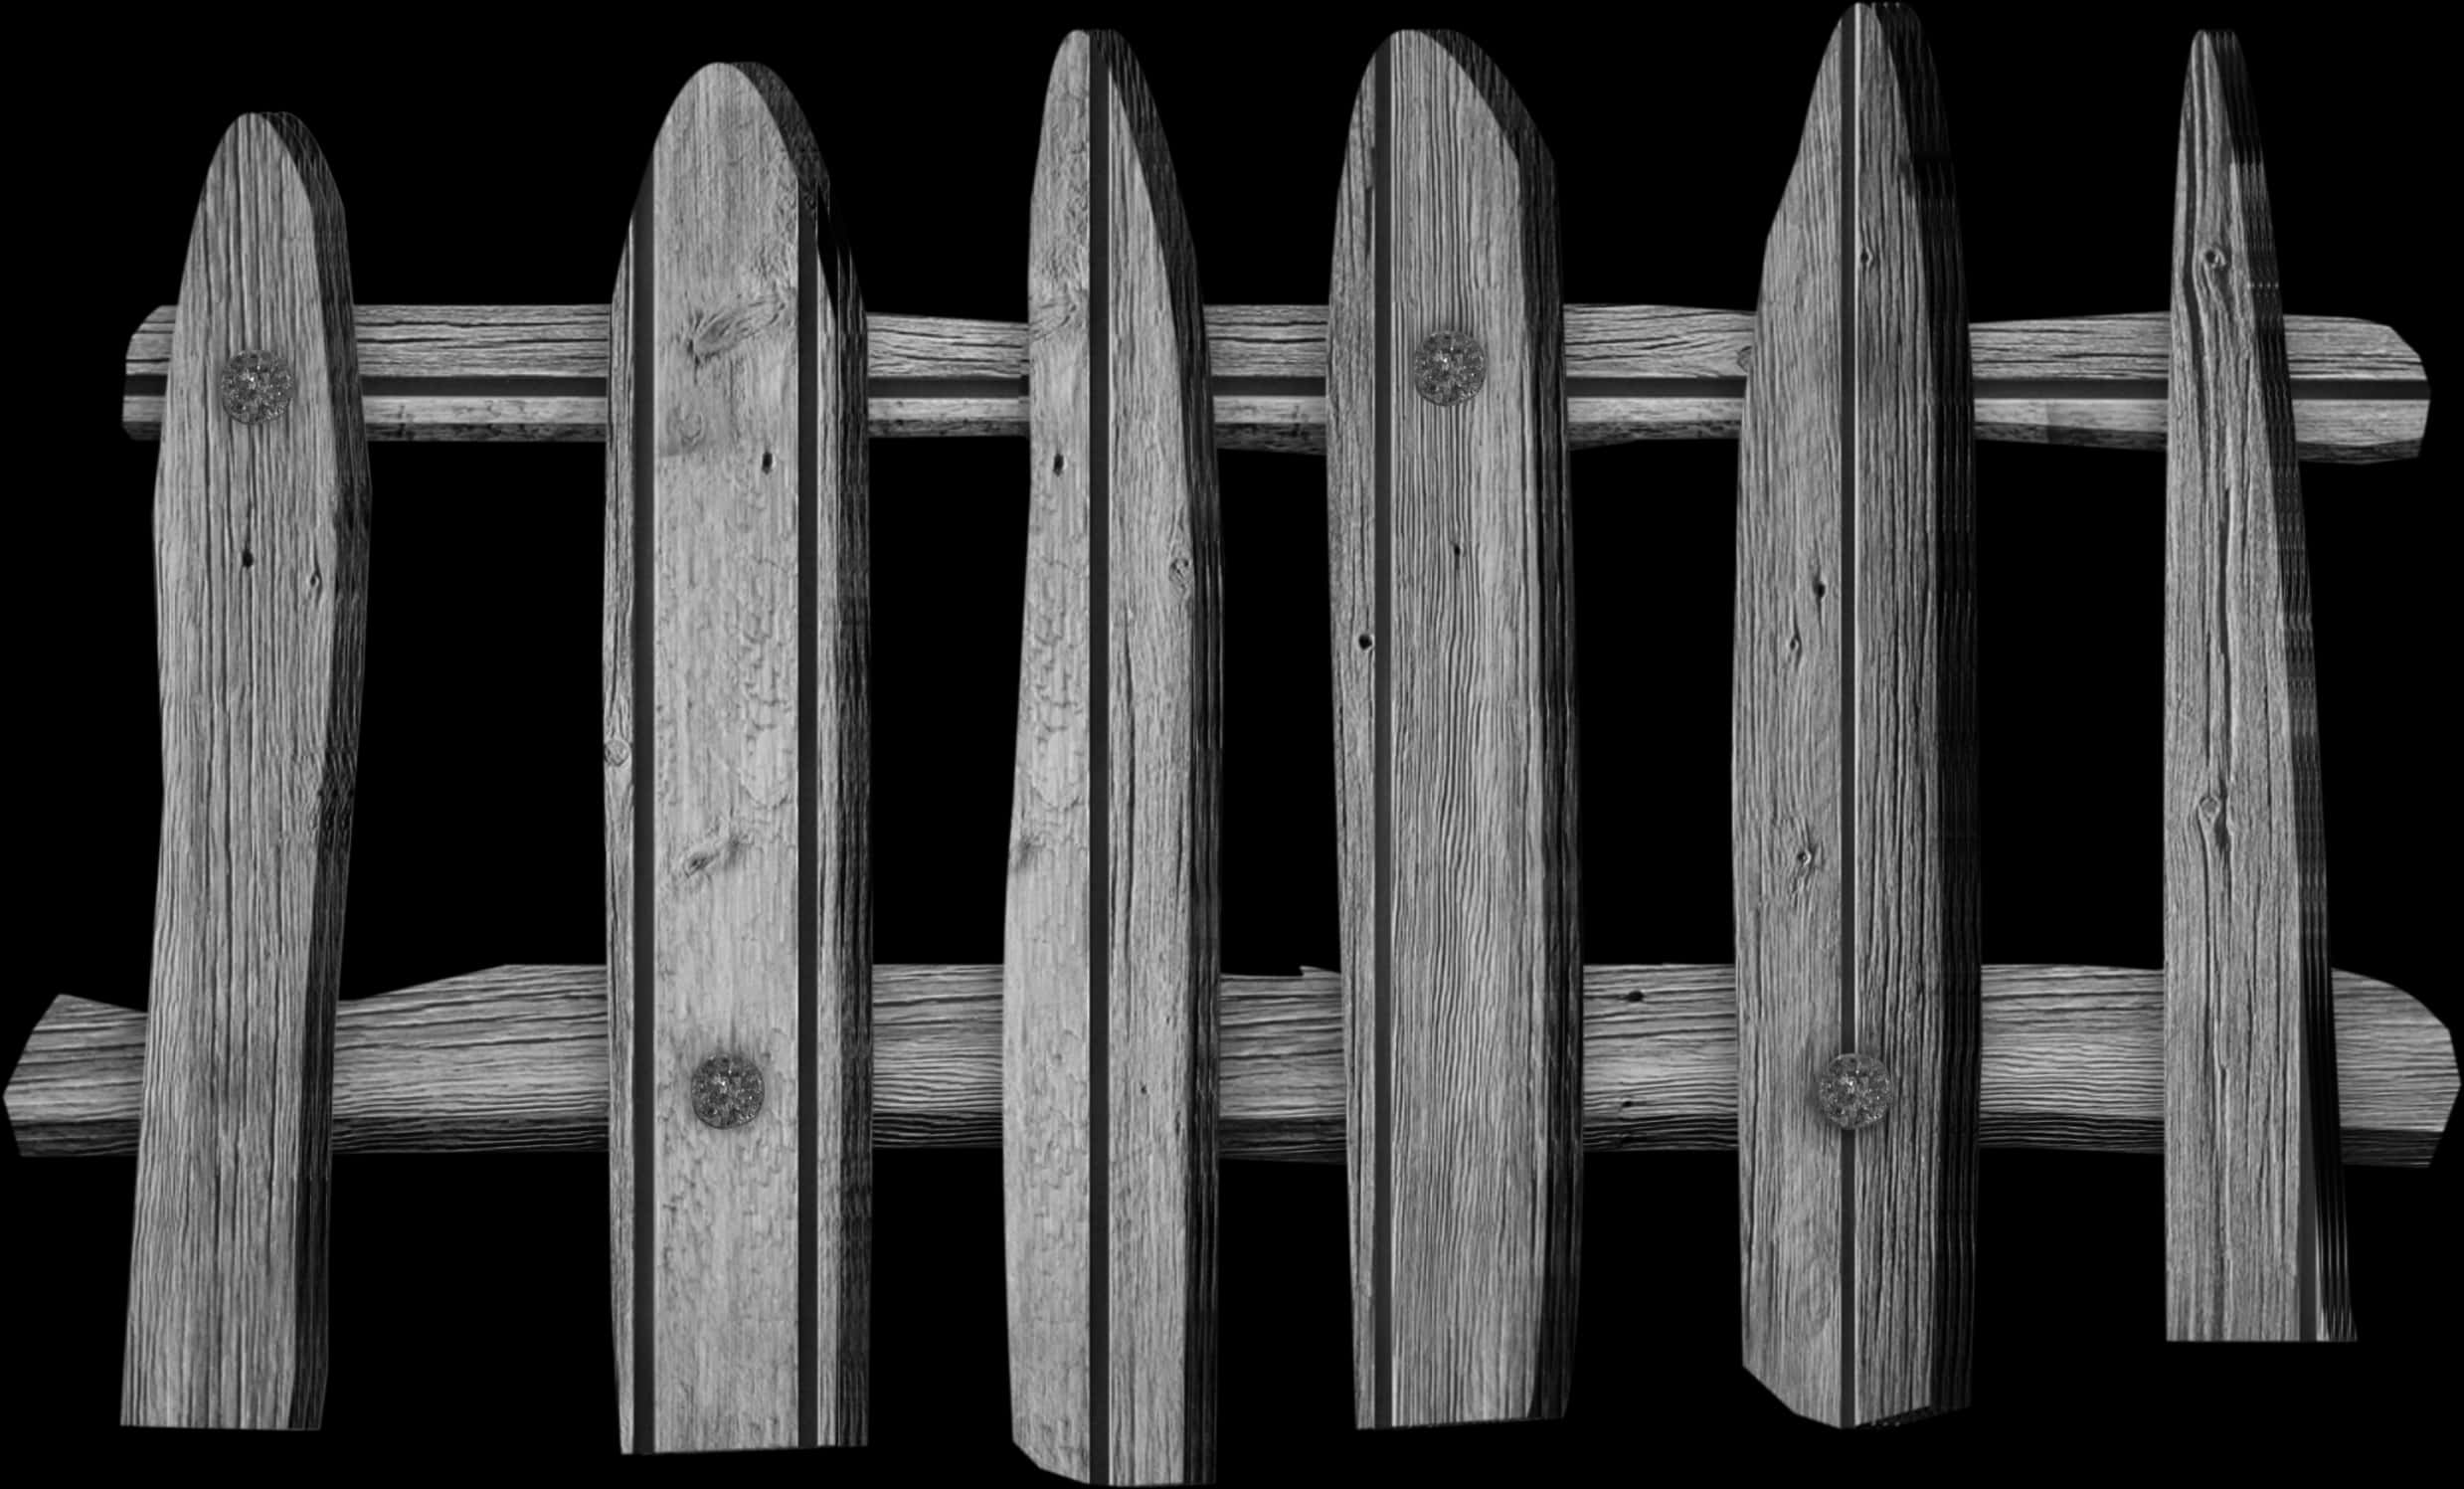 Wooden Fence Blackand White